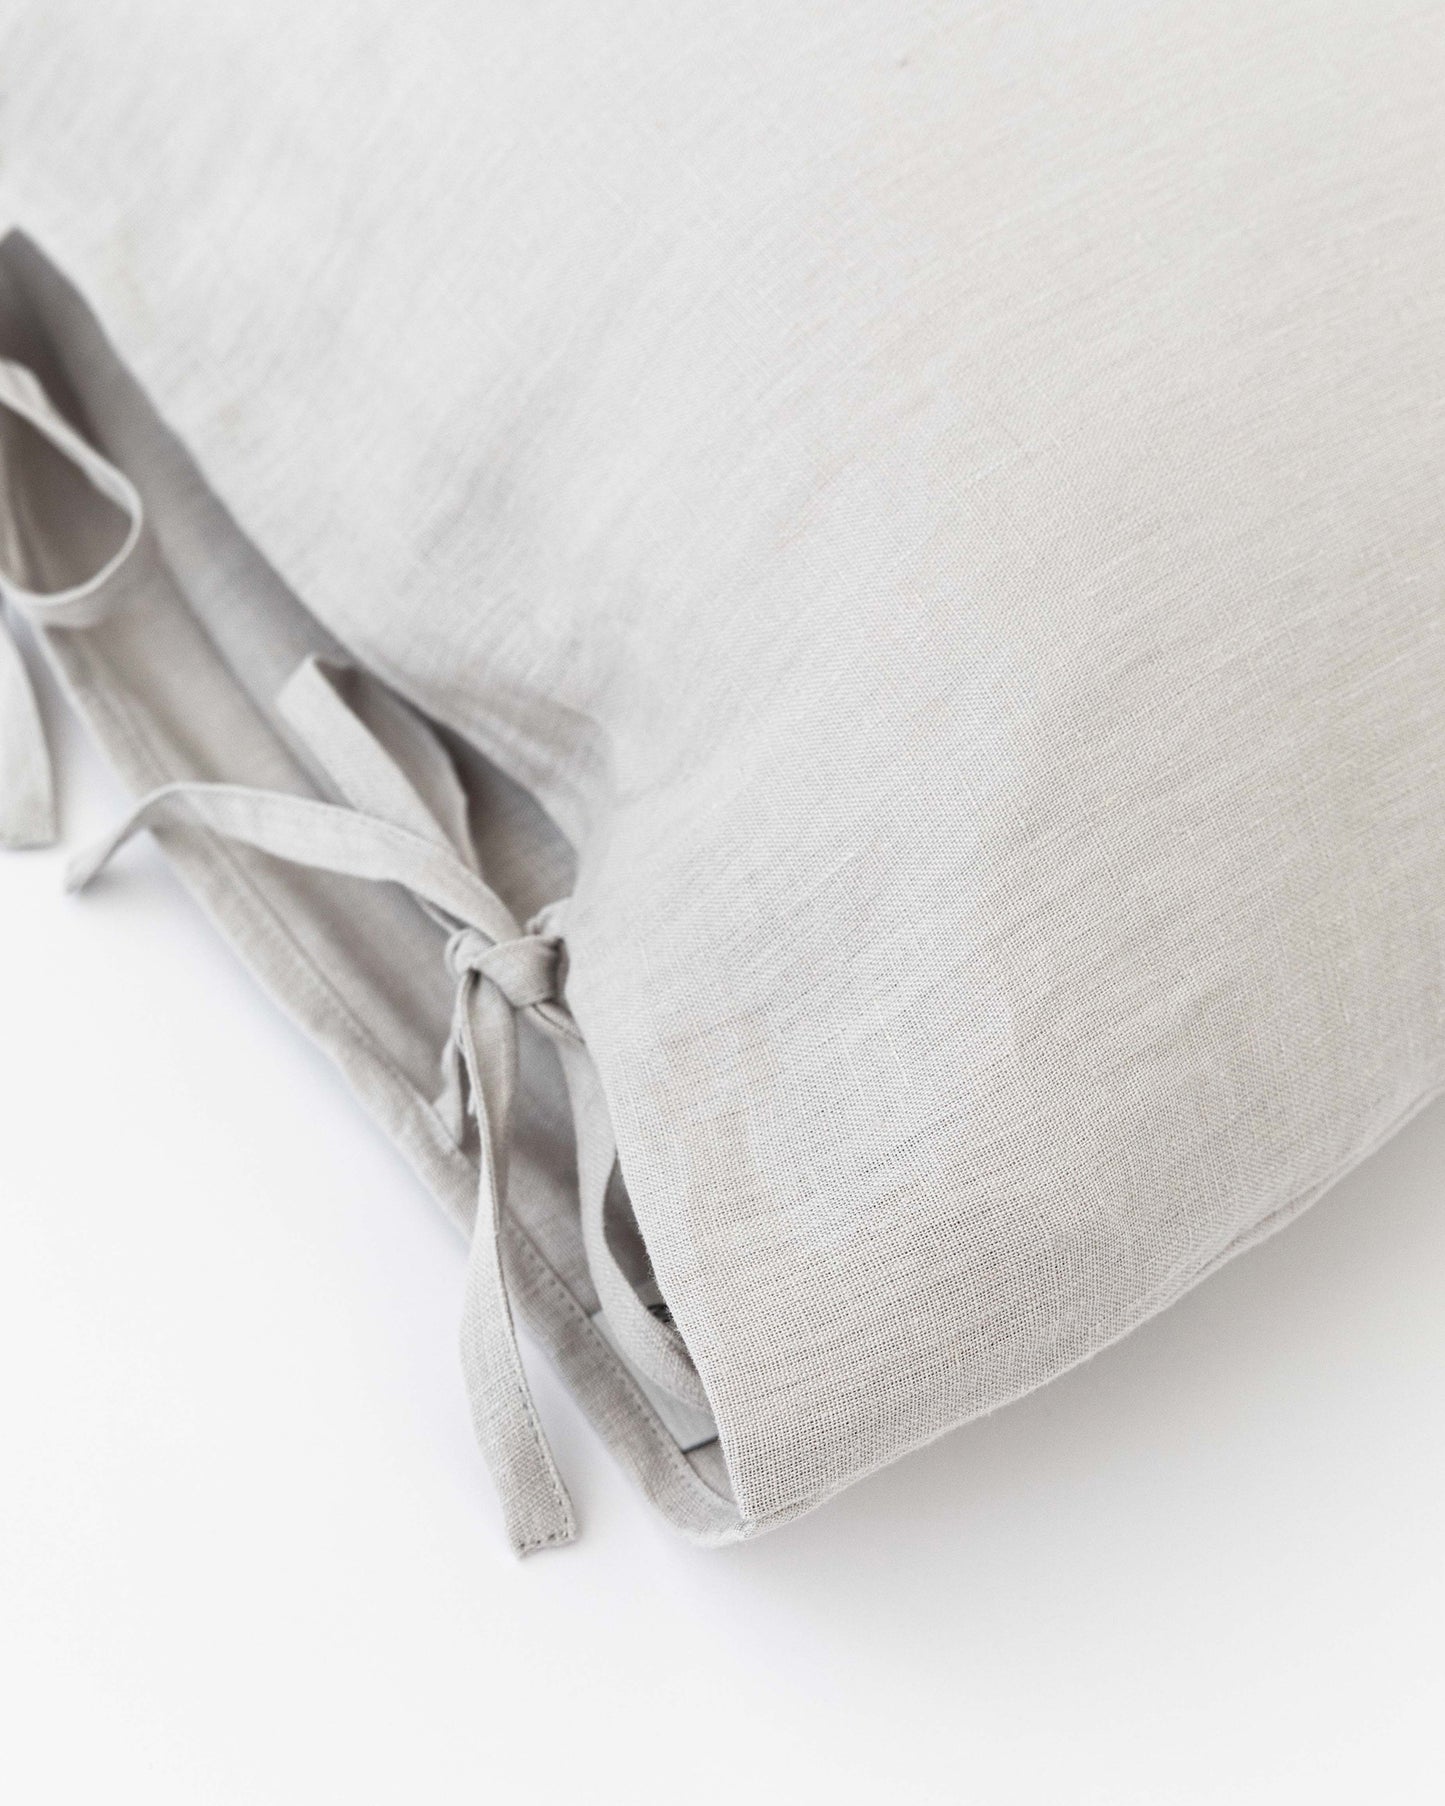 Linen pillowcase with ties in Light gray - MagicLinen